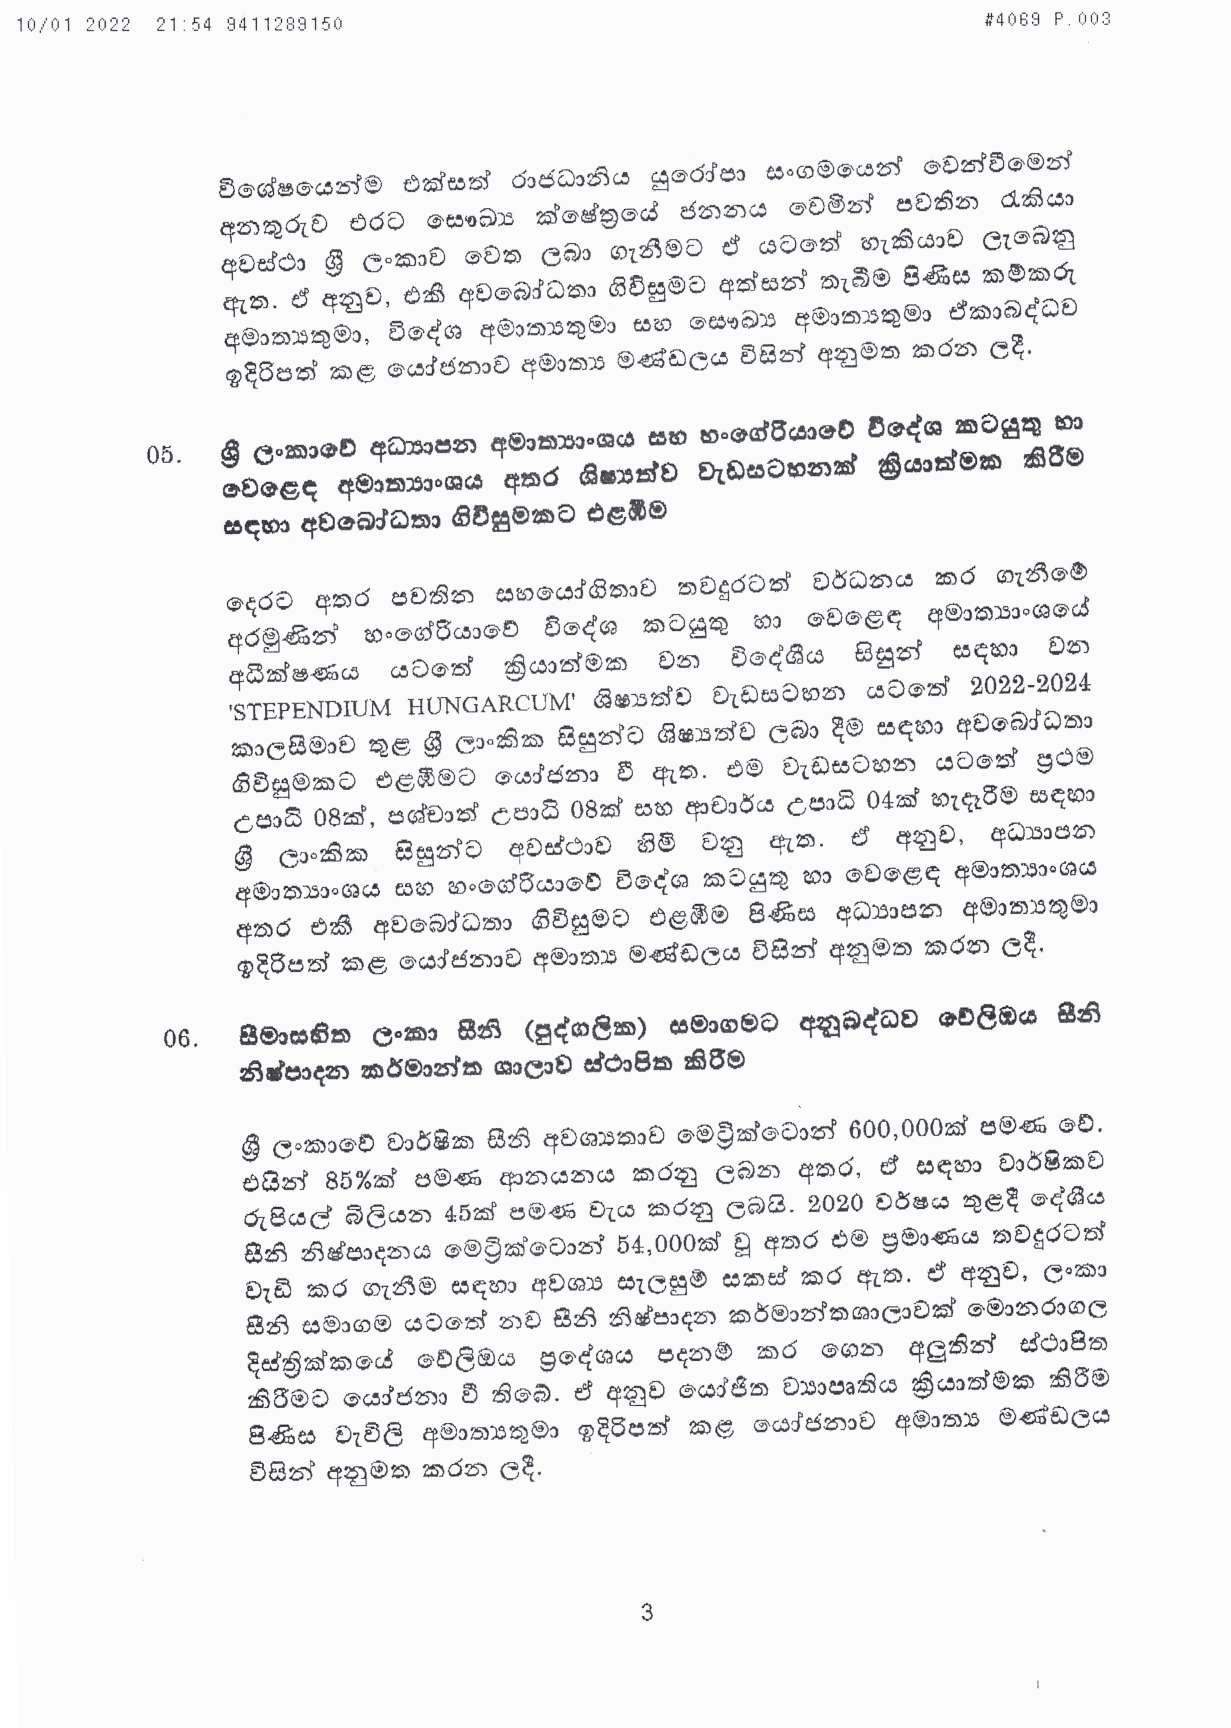 Cabinet Decision on 10.01.2022 page 003